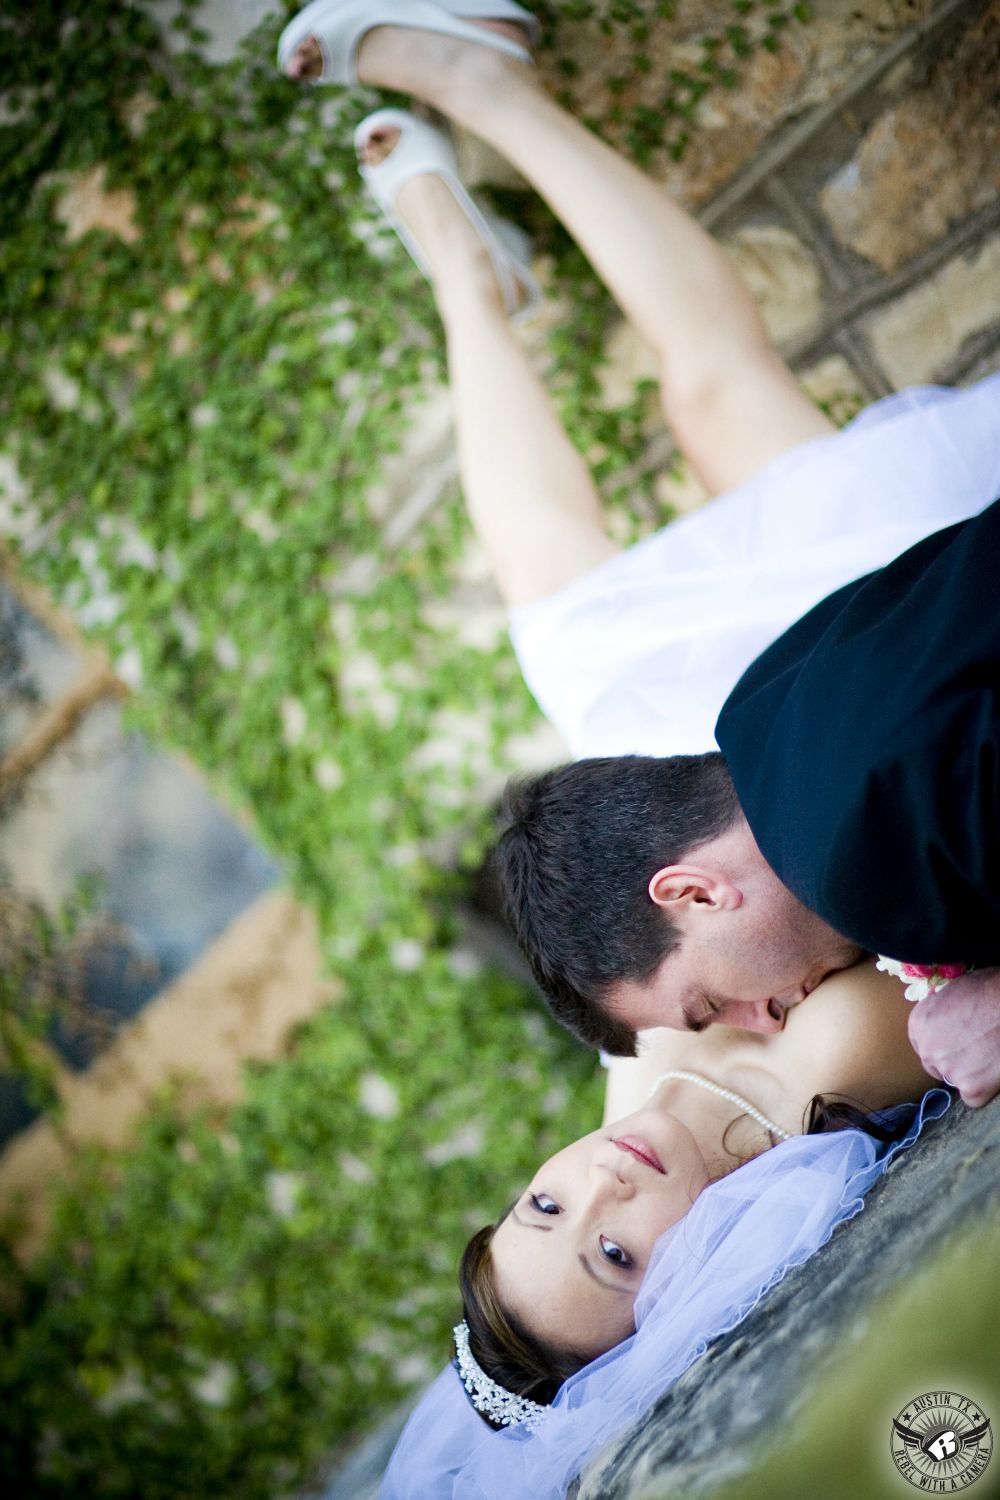 At Nature's Point wedding venue near Austin, Rebel with a Camera, Austin wedding photographer, takes picture of bride reclining on her back with legs up on fig ivy covered wall while groom kisses her neck. 